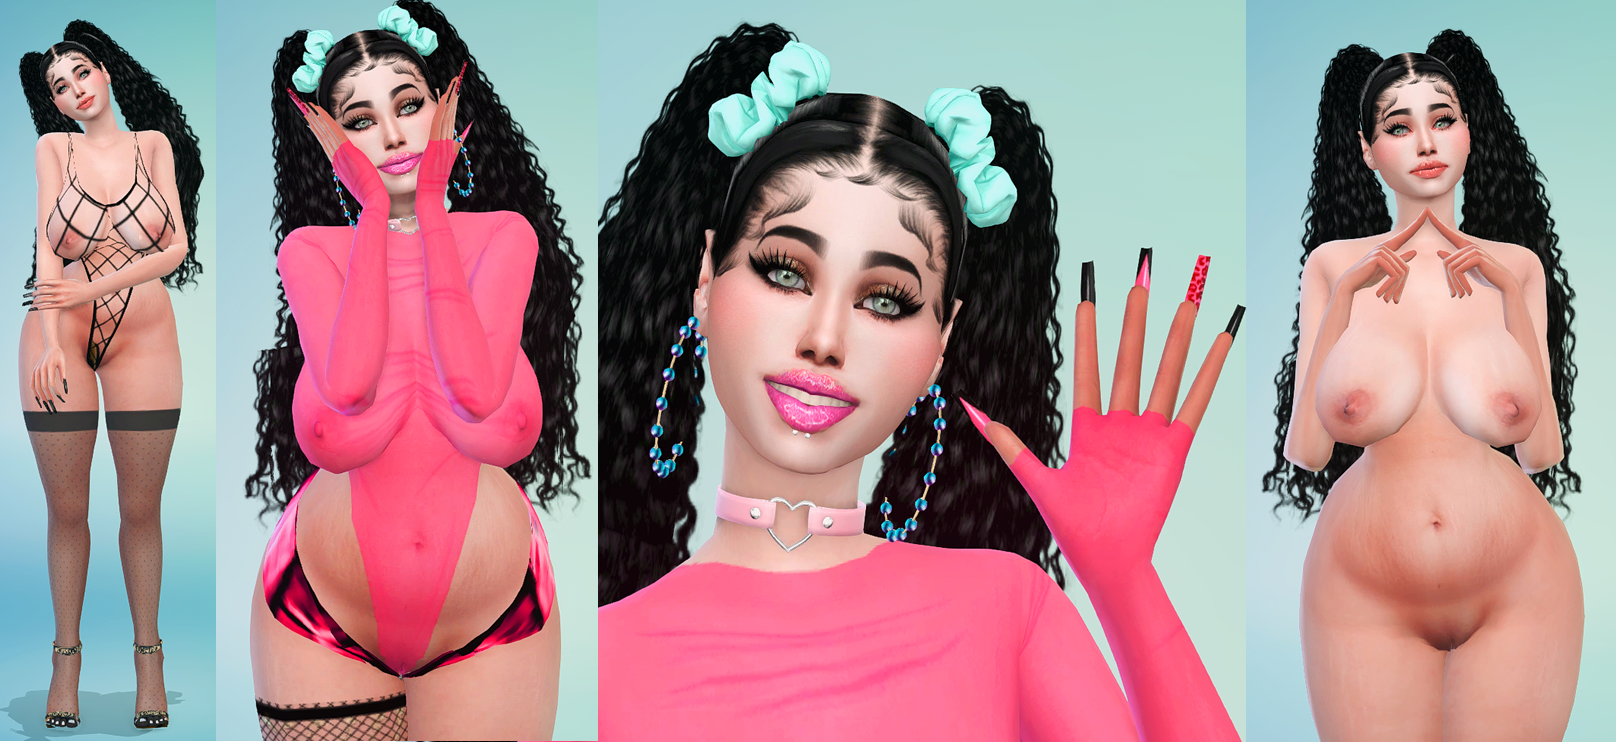 1183057829_sims4loverslab.png.866500aa79bdf607321c91c57ce61a97.png